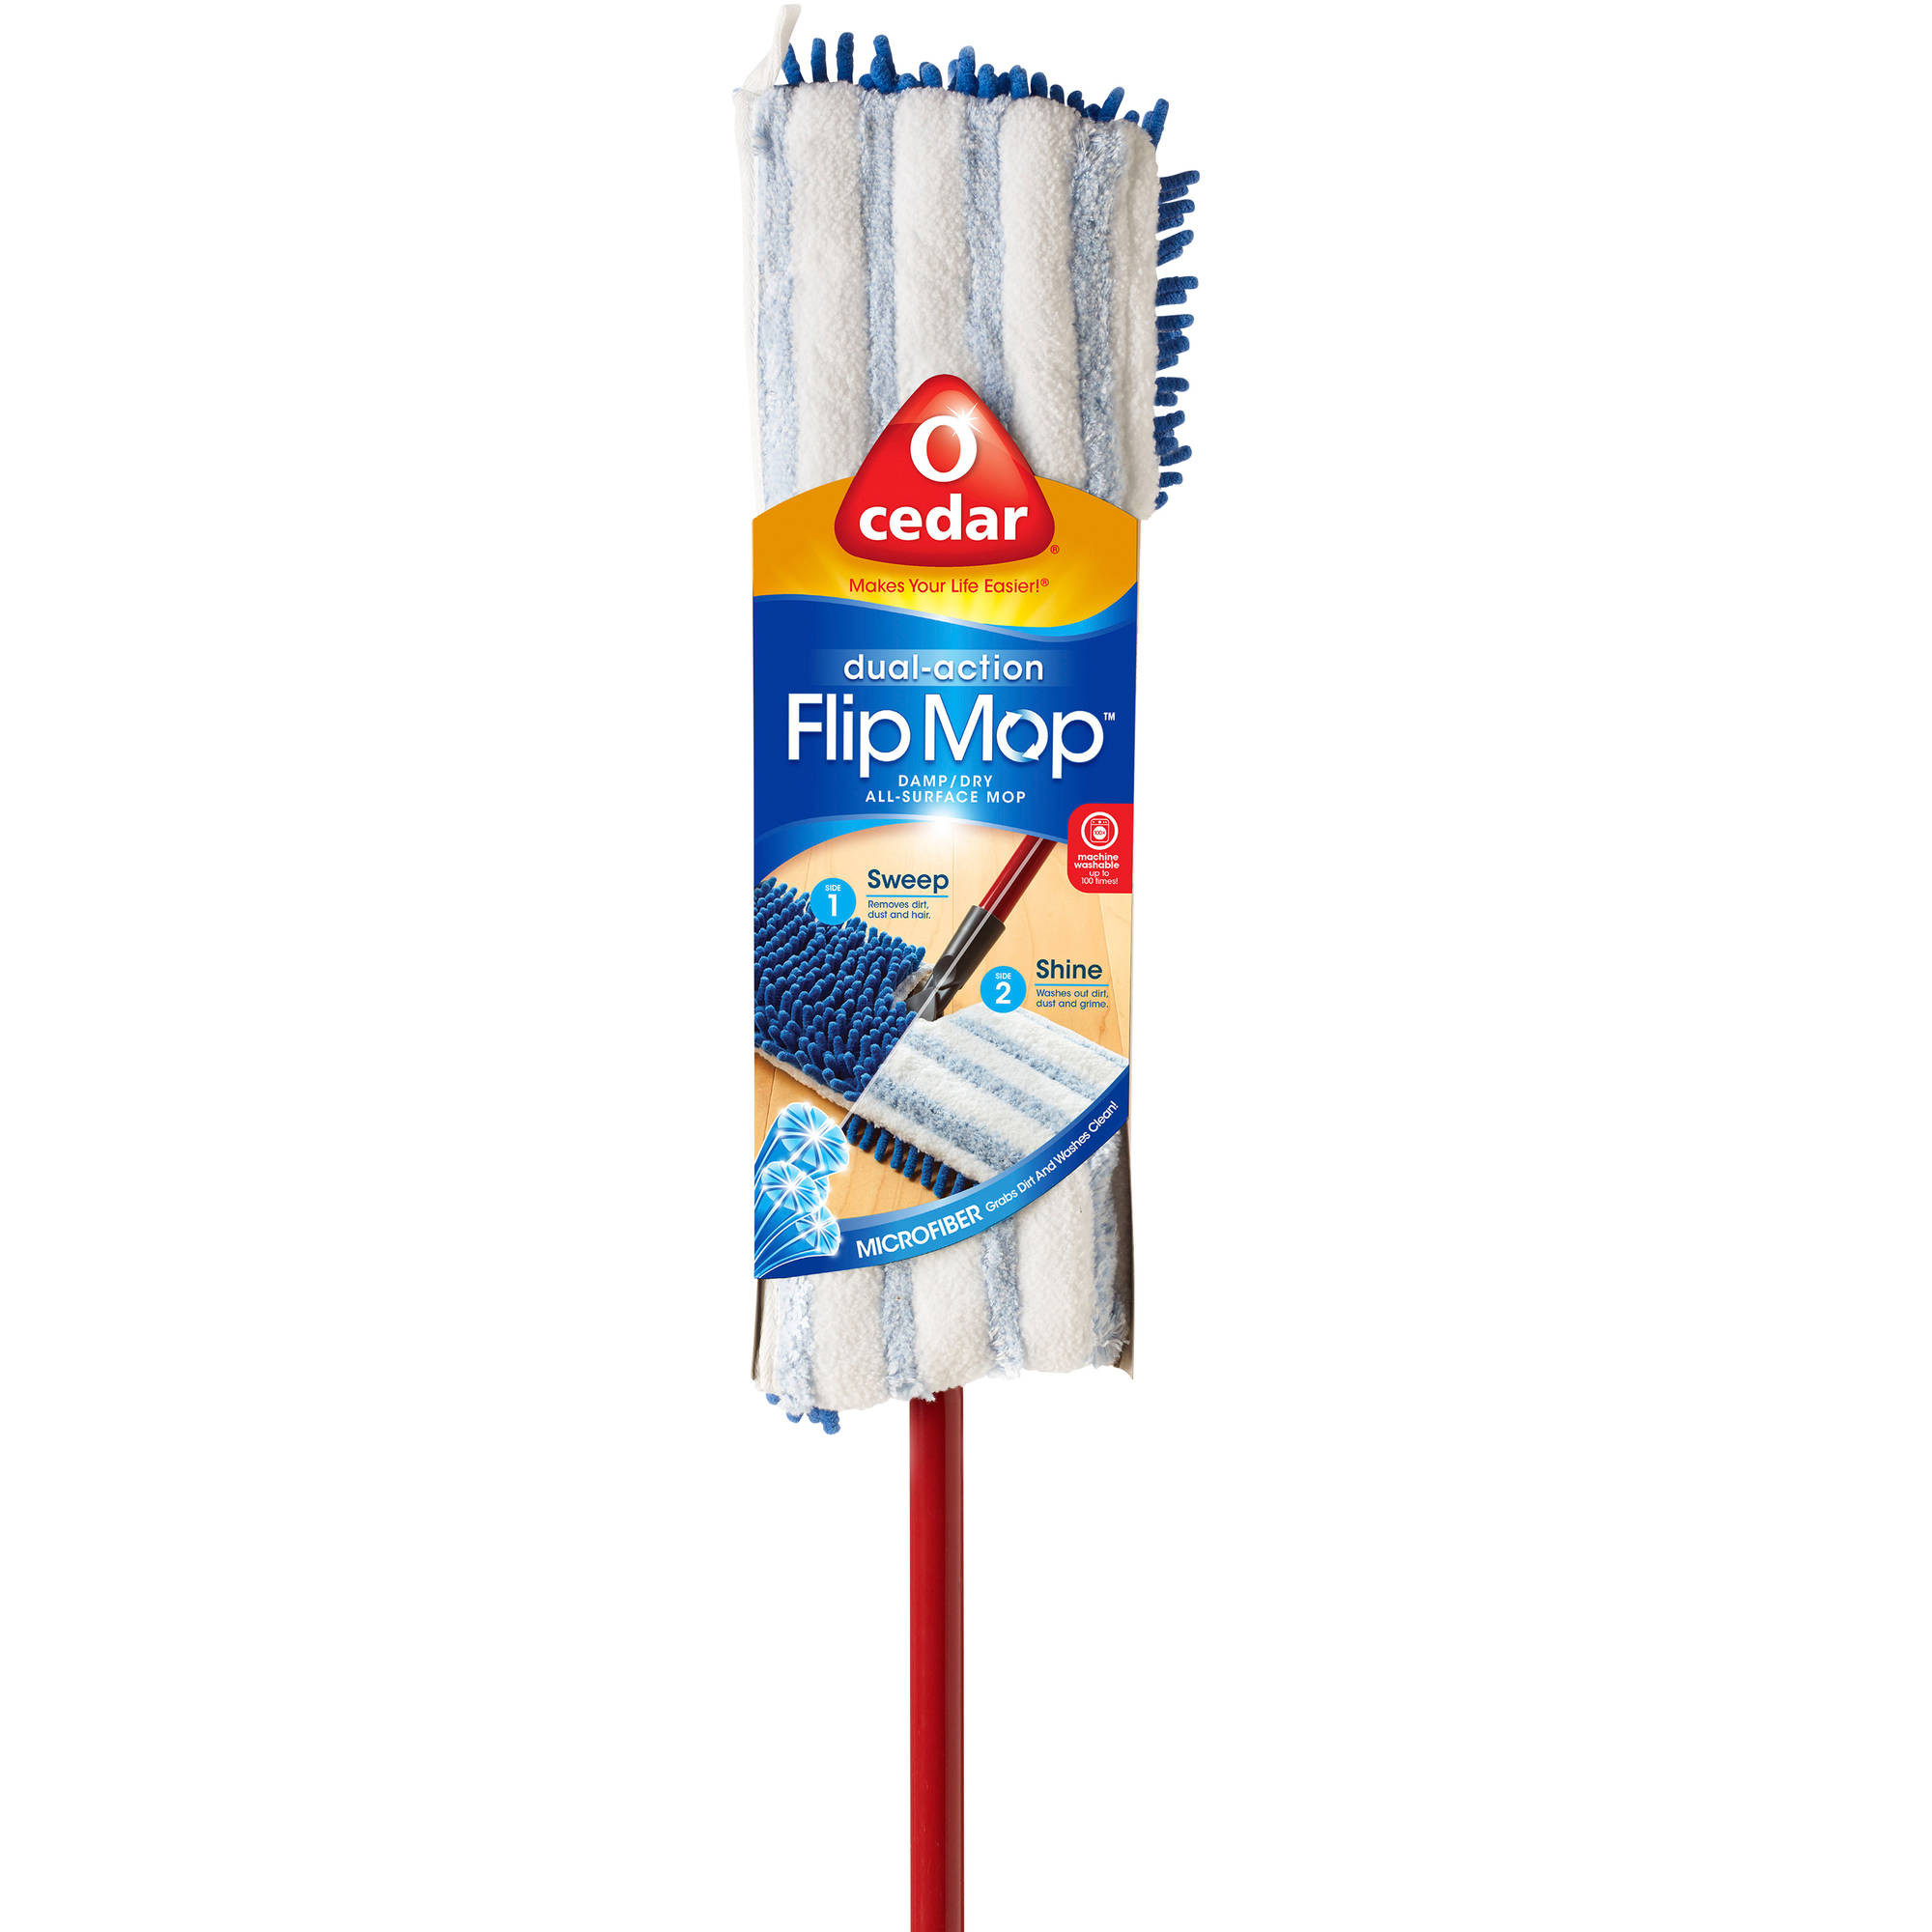 23 Recommended Hardwood Floor Mop Walmart 2024 free download hardwood floor mop walmart of as seen on tv hurricane spin mop dolly walmart com for 4e633bf5 5ce1 4a06 971b ad777ba225a6 1 8a9ce1f4c6ce5aa62a196a3a26c2ded9